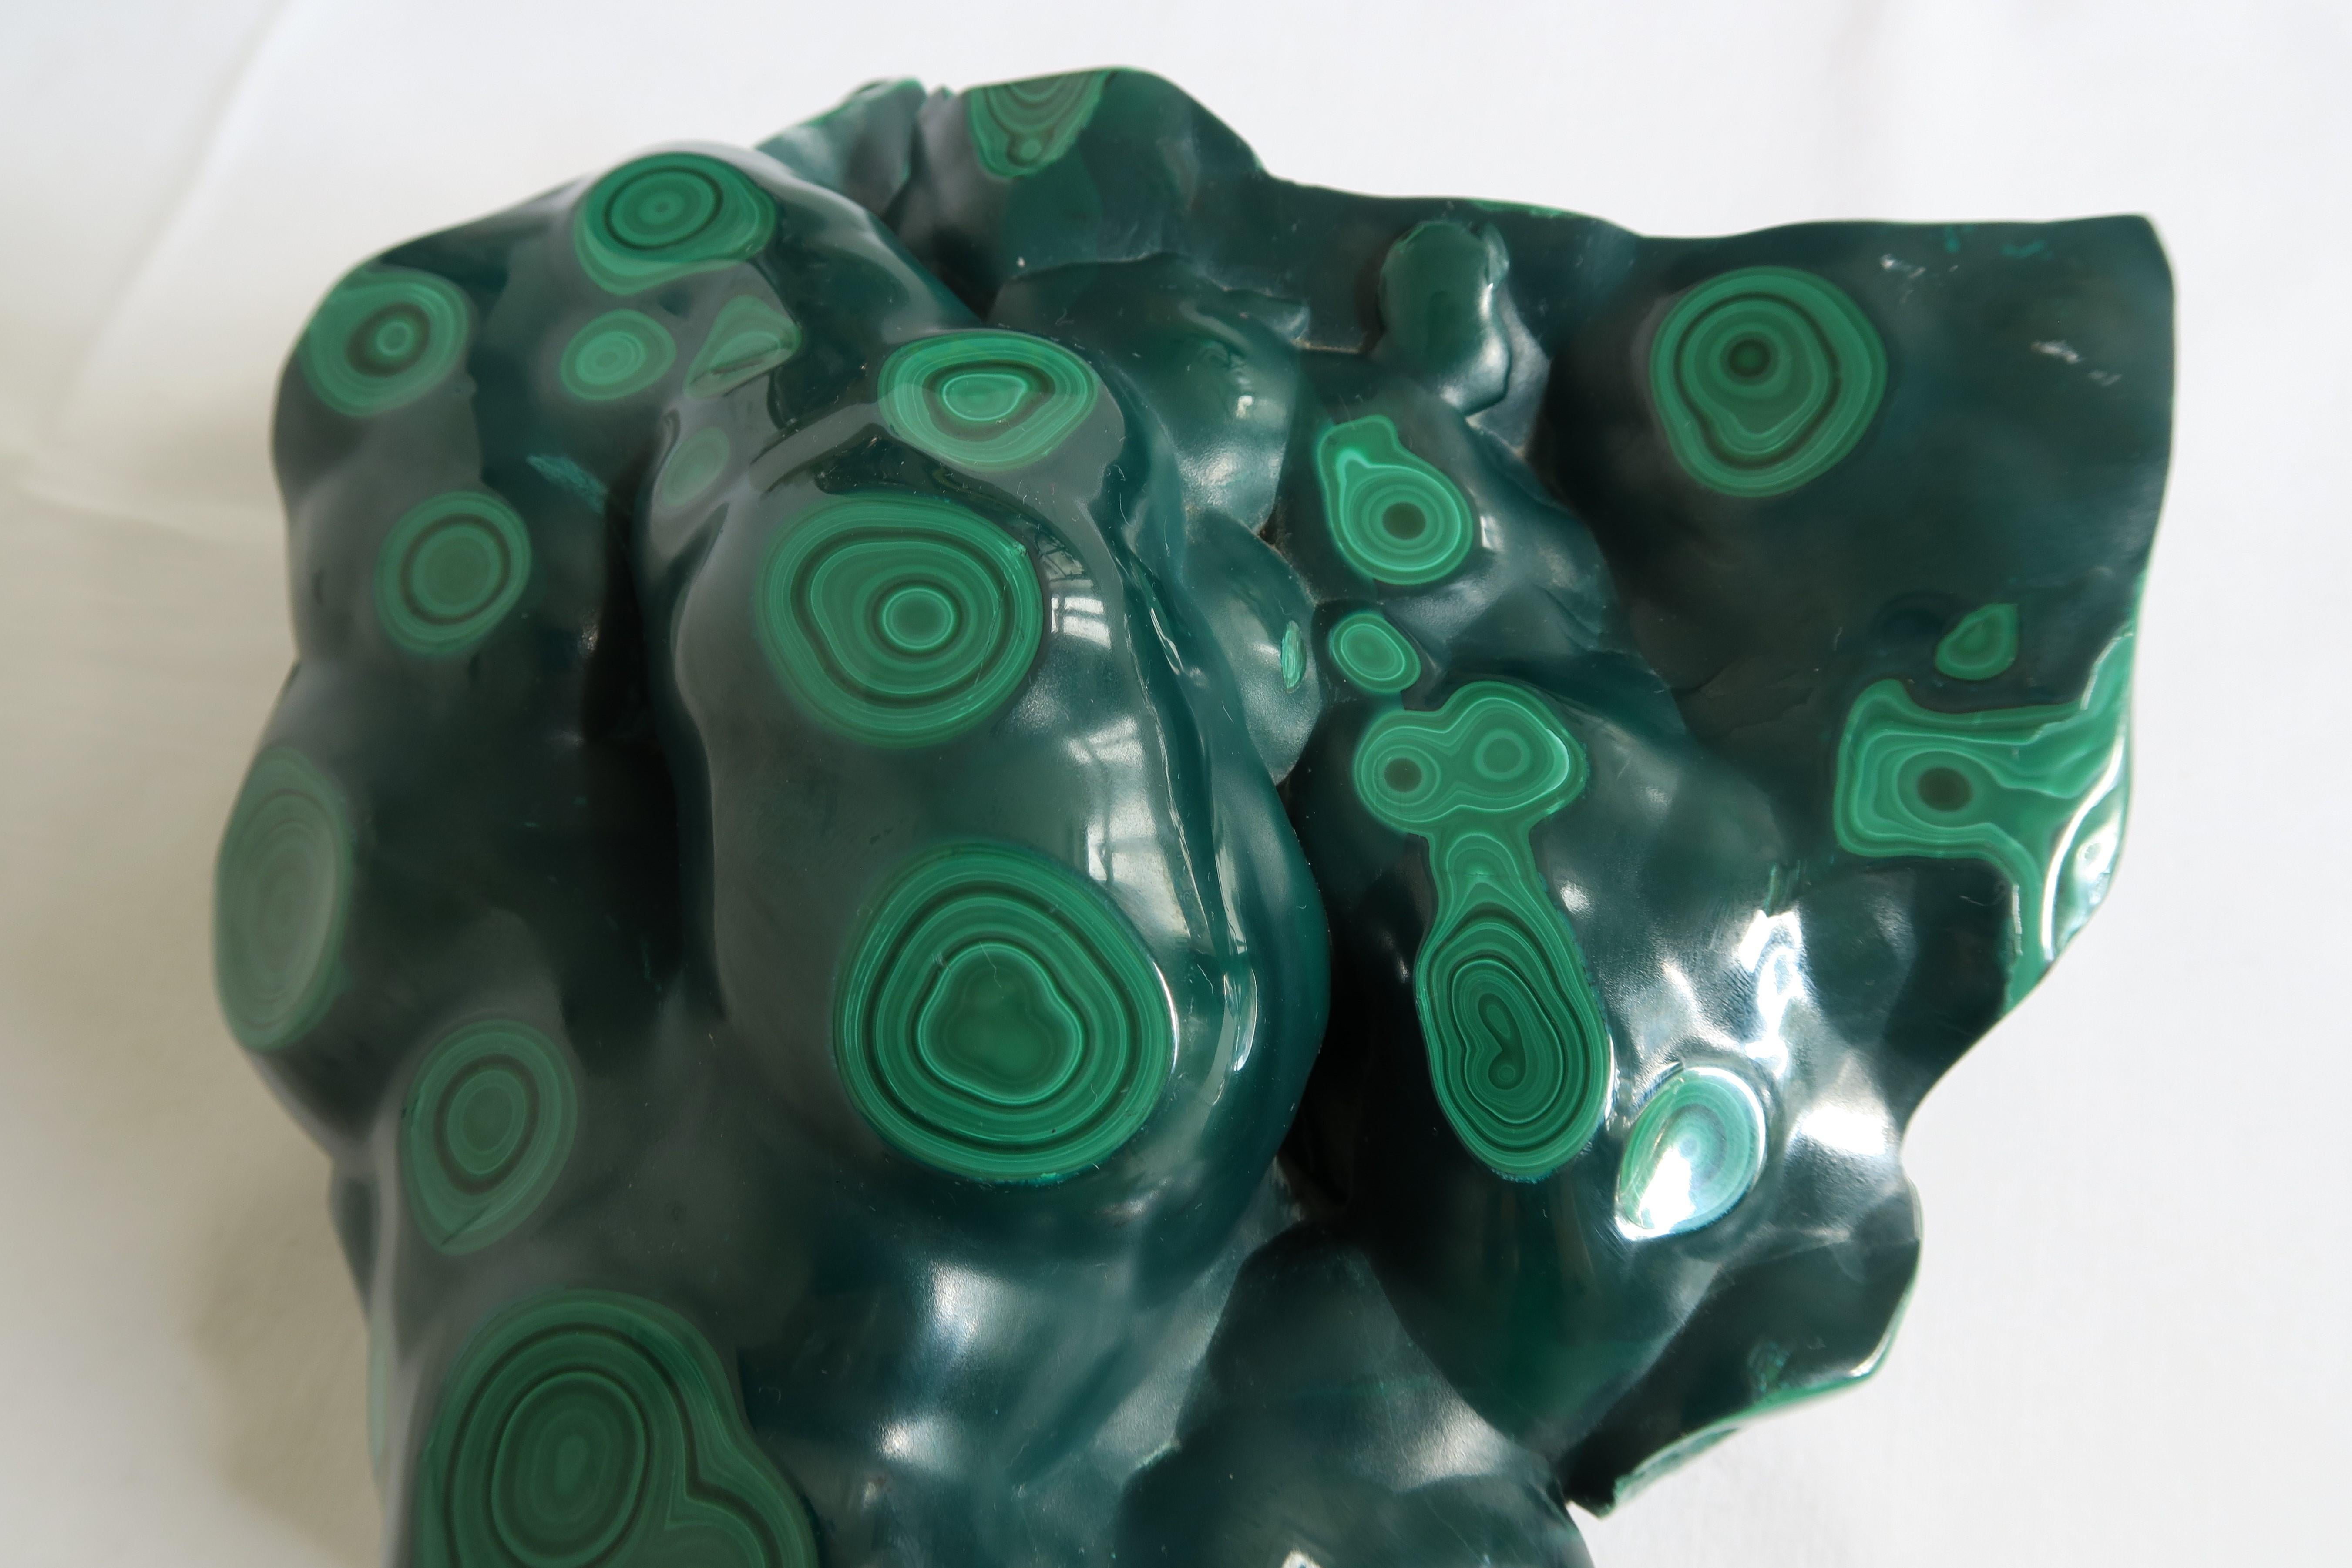 For sale is an original malachite. It weighs 3.83kg or 135oz and has been partially cut and polished to reveal its breathtaking structure and various shades of green. The bottom of the stone was kept its natural raw finish. Matchbox for